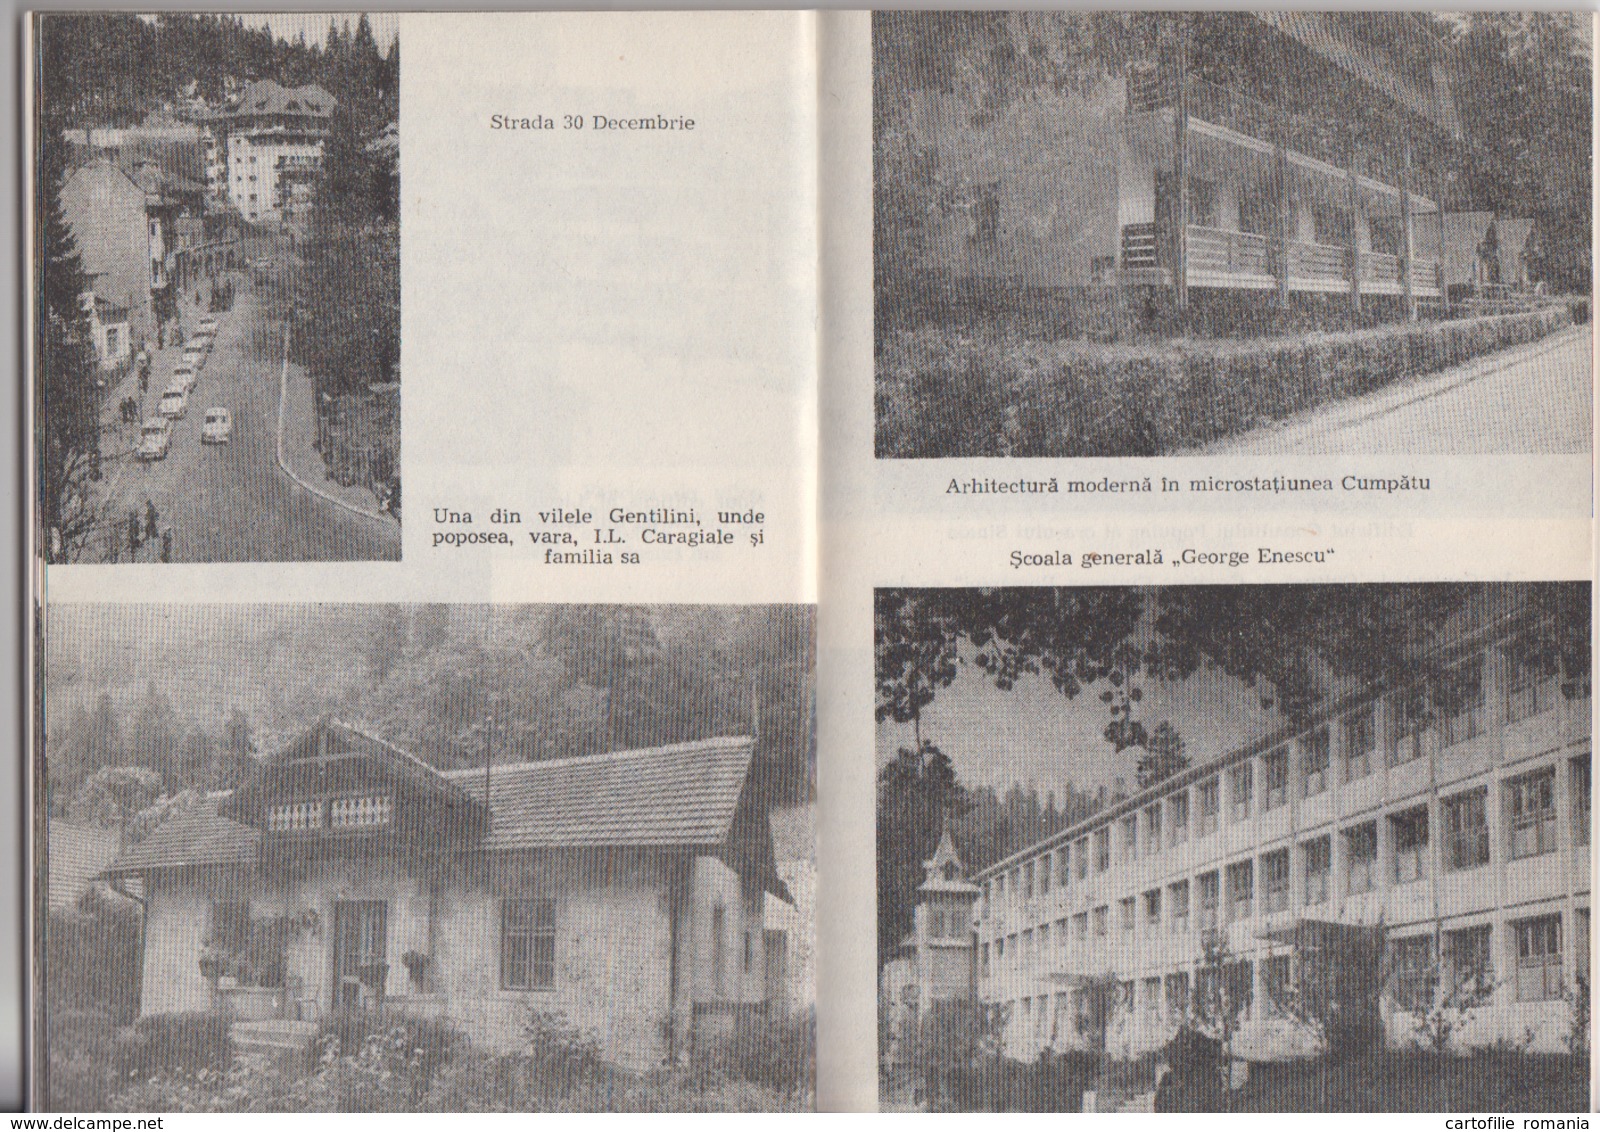 Romania - Sinaia - Tourist guide book - Railway cable car - Illustrated edition - Bucuresti 1989 - 117 pages